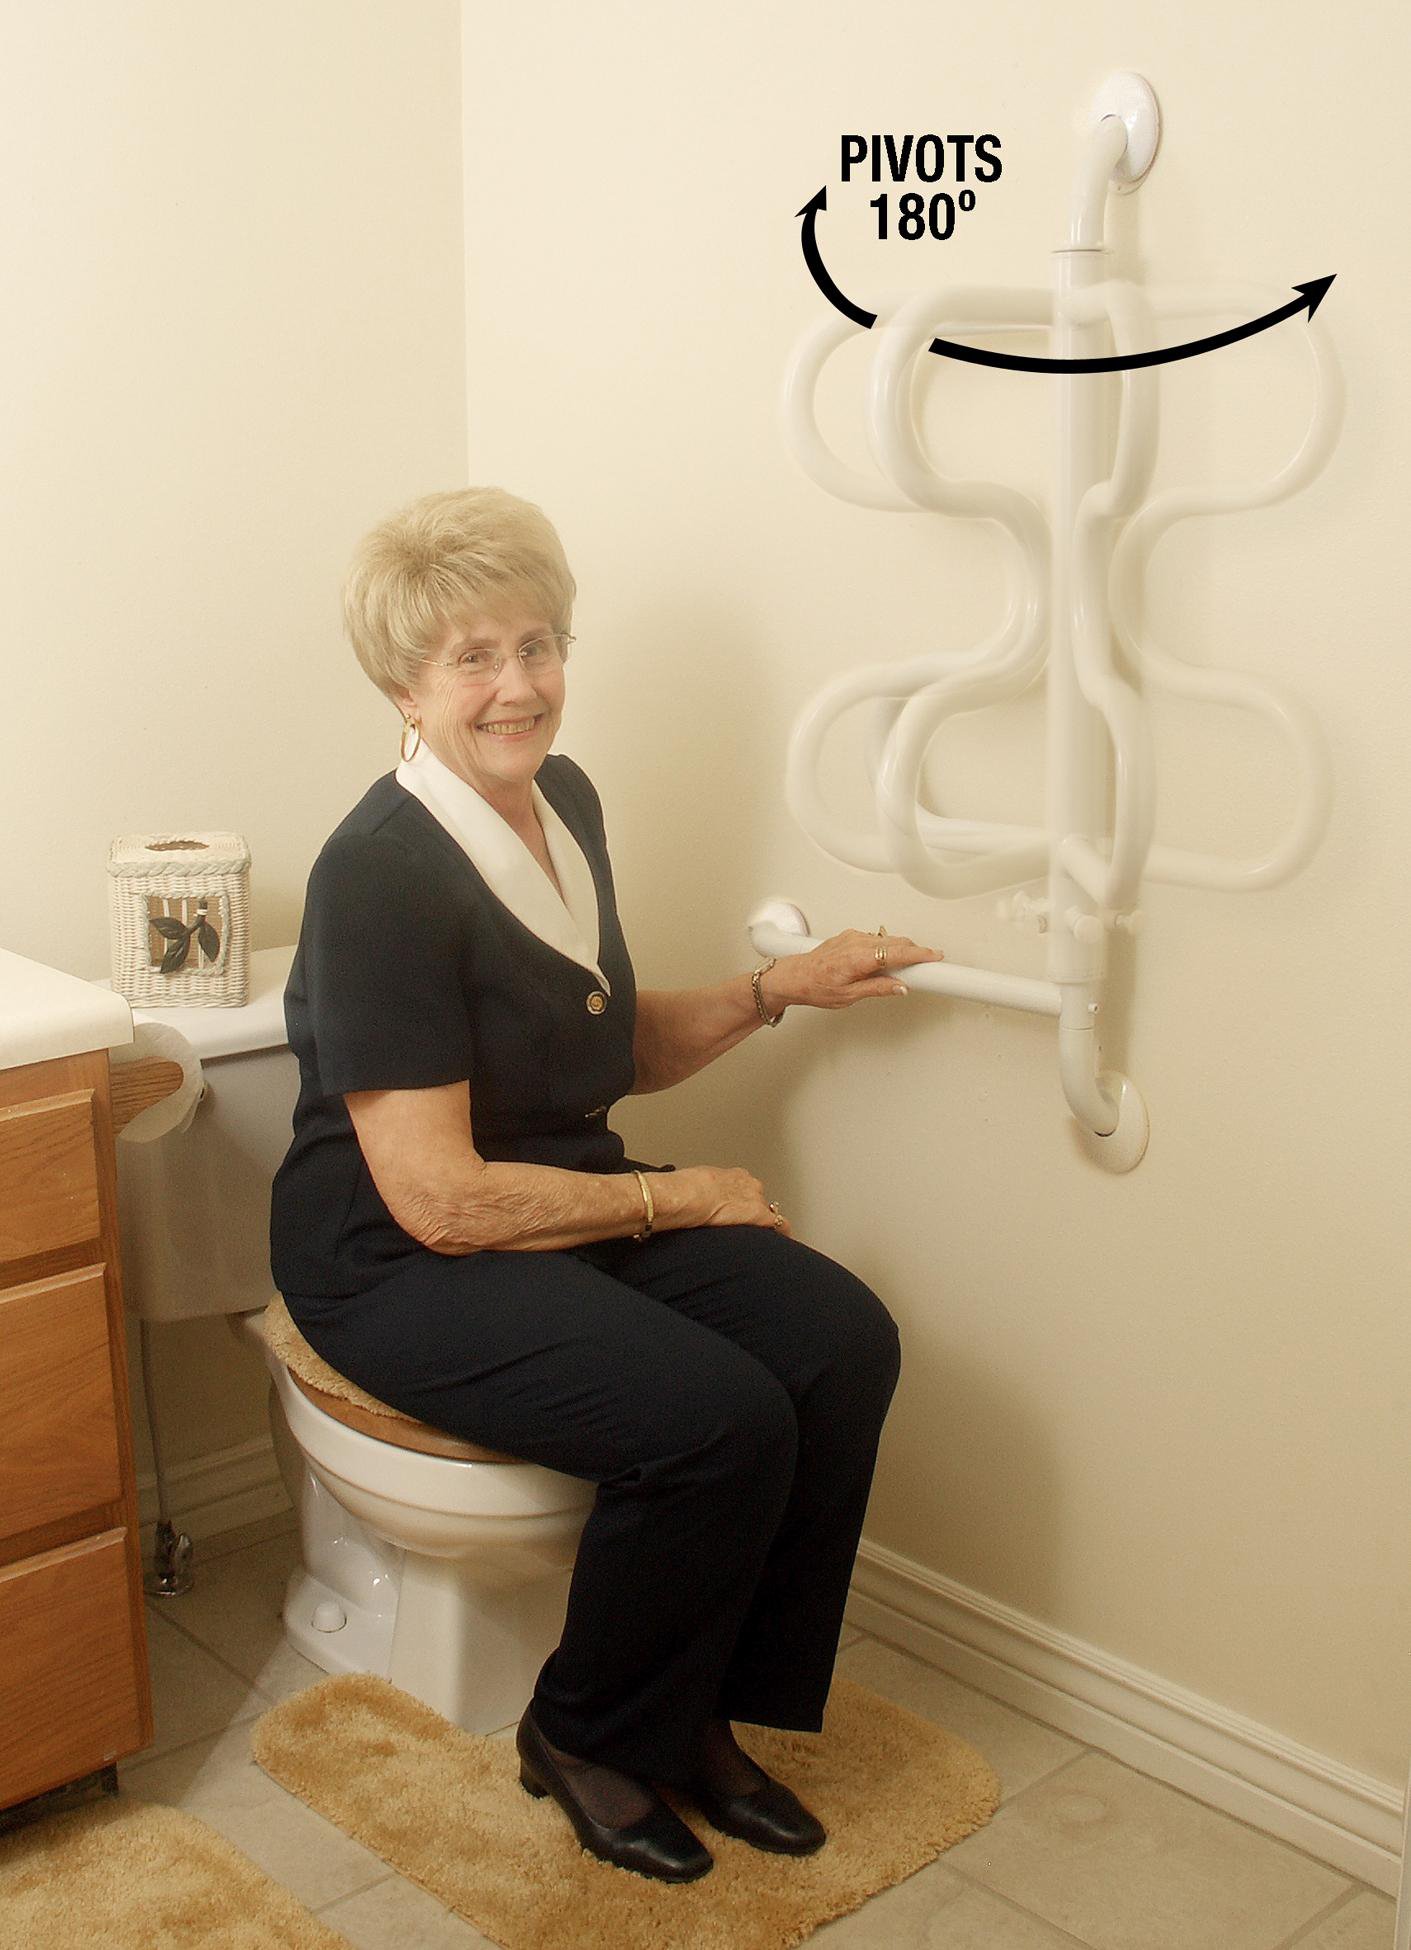 Stander Curve Grab Bar with Handrail, 14-Inch Bathroom Security Assist Bar for Toilet, Shower, and Bathtub Aid, Rotating Safety Handle, Wall Mounted Swing Grab Bar for Adults, Seniors, and Elderly